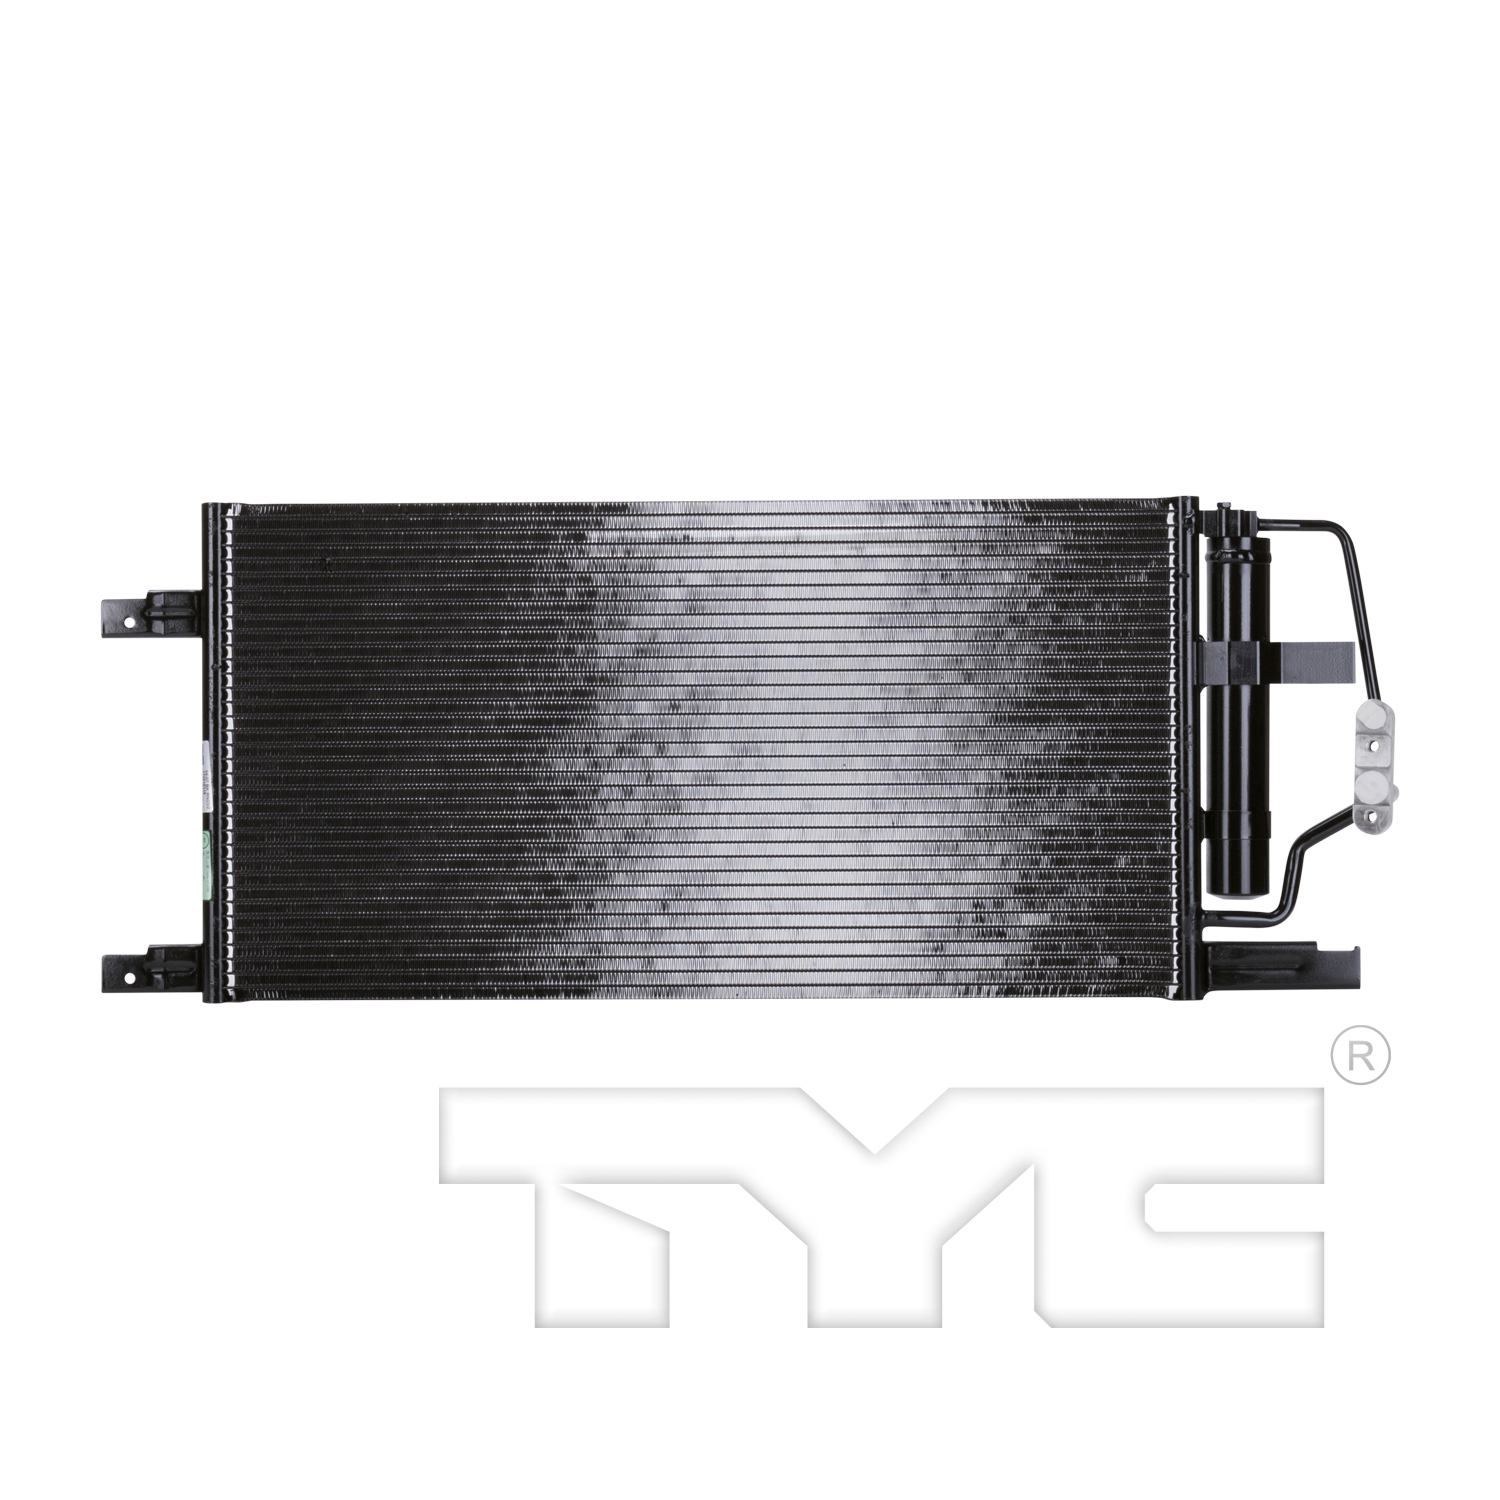 Aftermarket AC CONDENSERS for BUICK - RENDEZVOUS, RENDEZVOUS,04-07,Air conditioning condenser